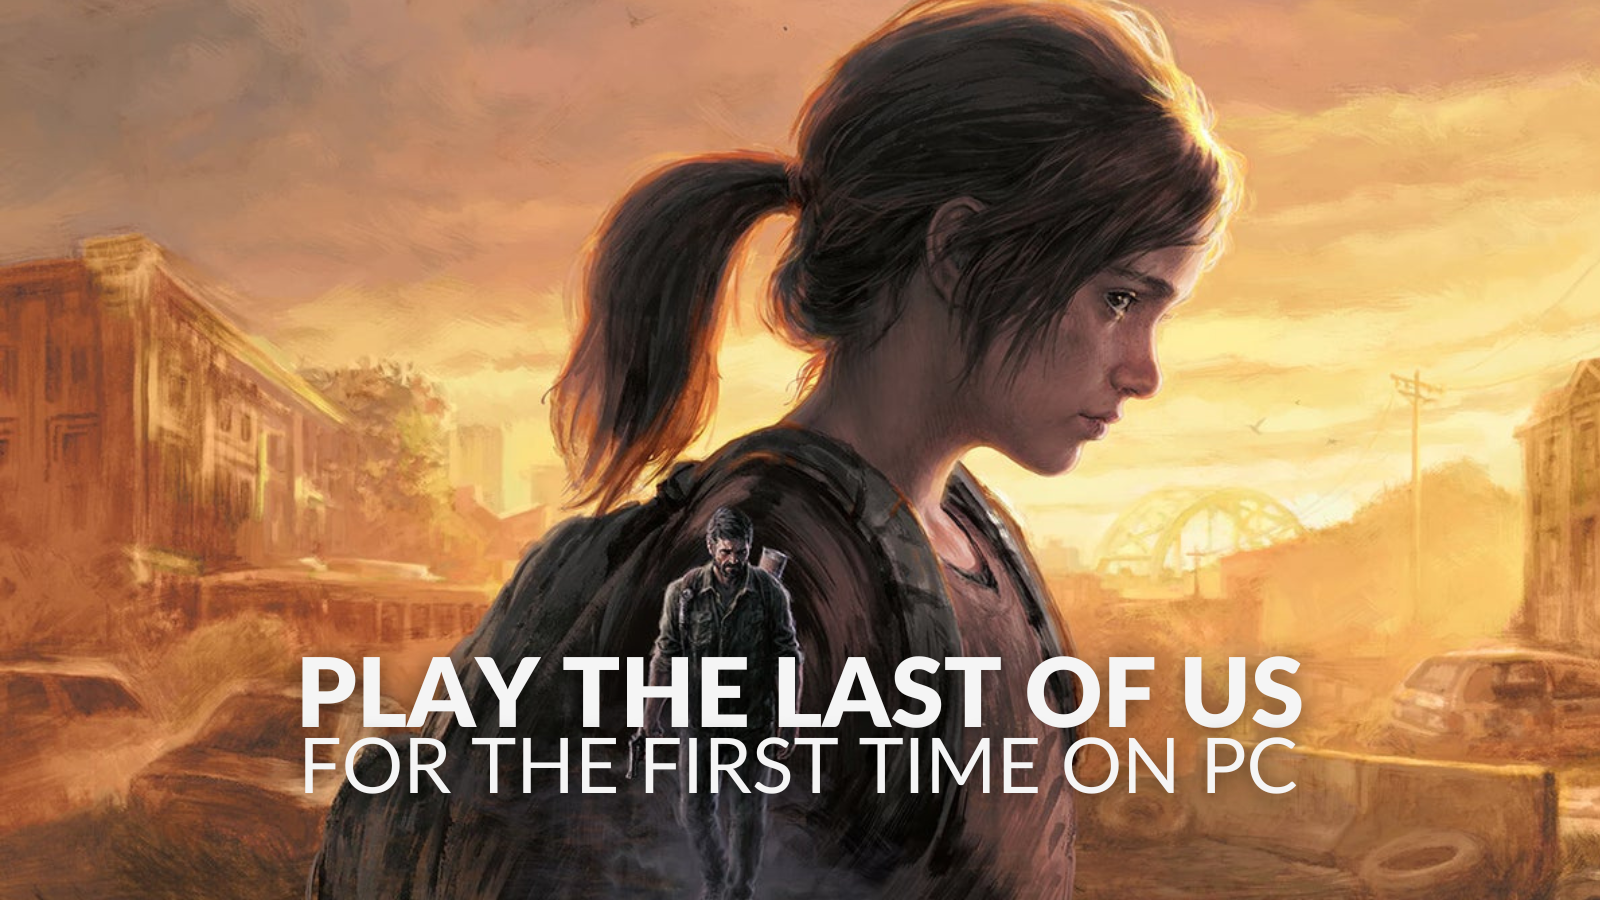 PC-only gamer finally plays The Last Of Us, calls it 'best game ever